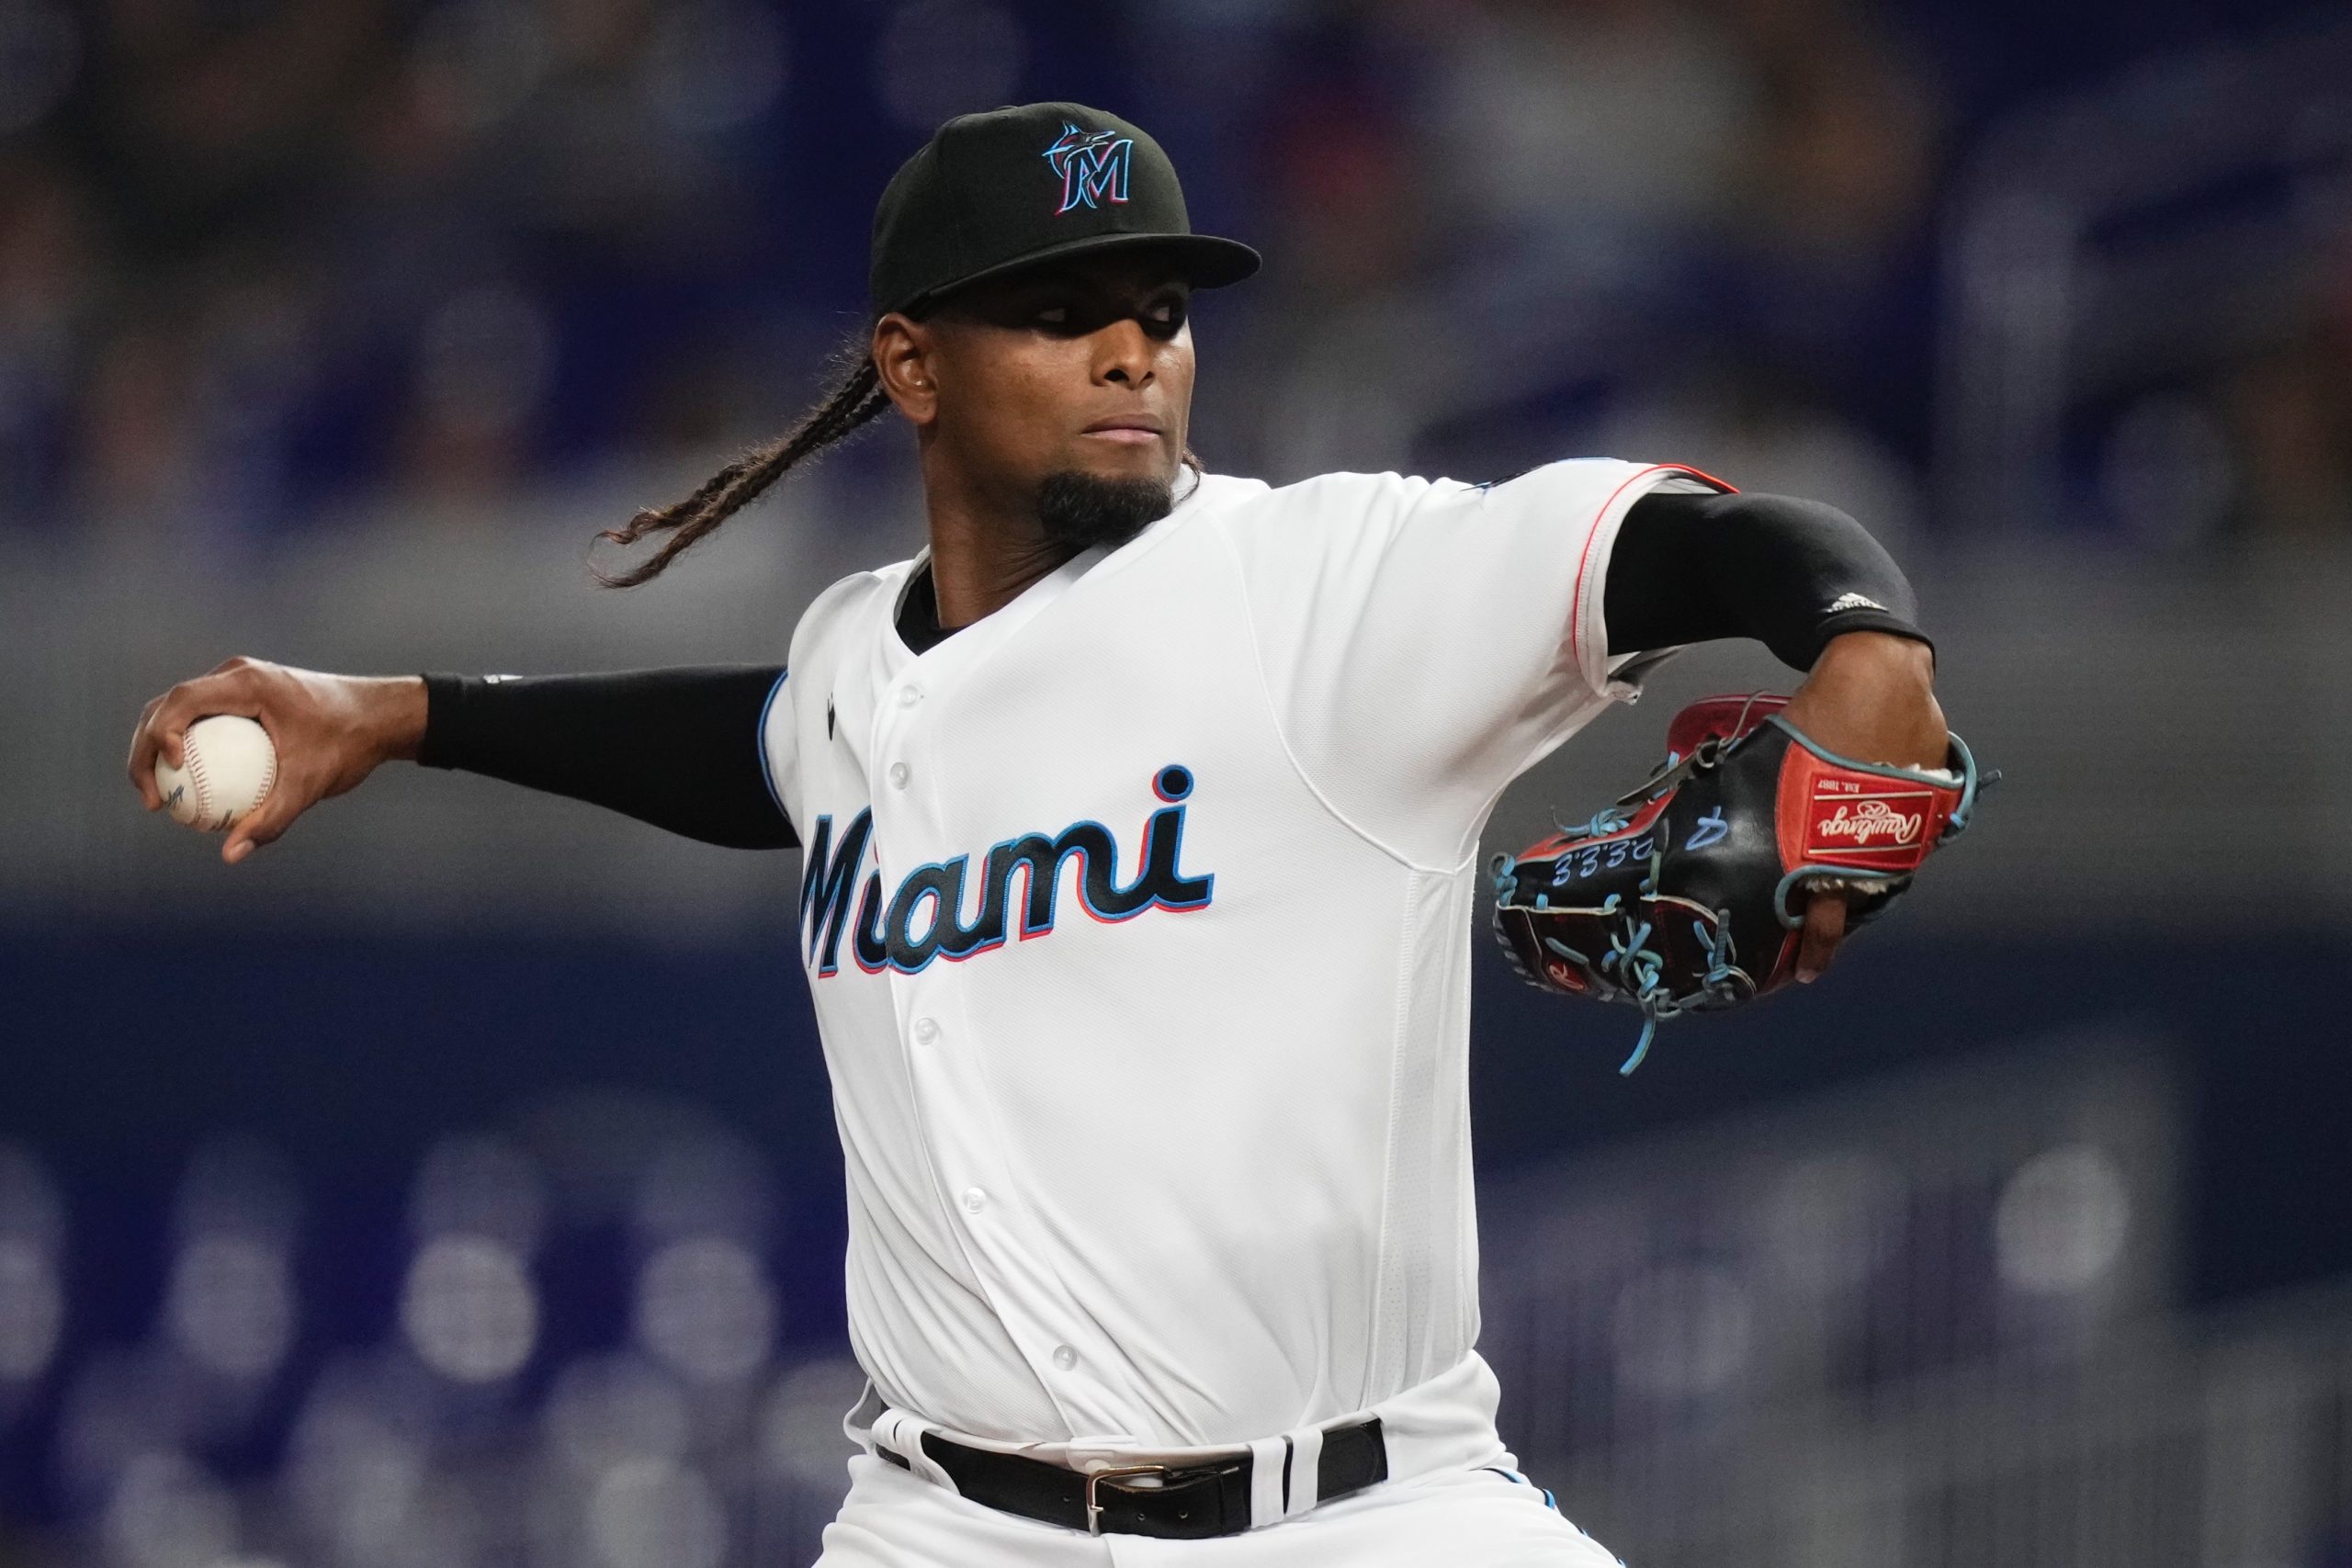 Jun 7, 2022; Miami, Florida, USA; Miami Marlins starting pitcher Edward Cabrera (27) delivers a pitch n the 1st inning against the Washington Nationals at loanDepot park. Mandatory Credit: Jasen Vinlove-USA TODAY Sports